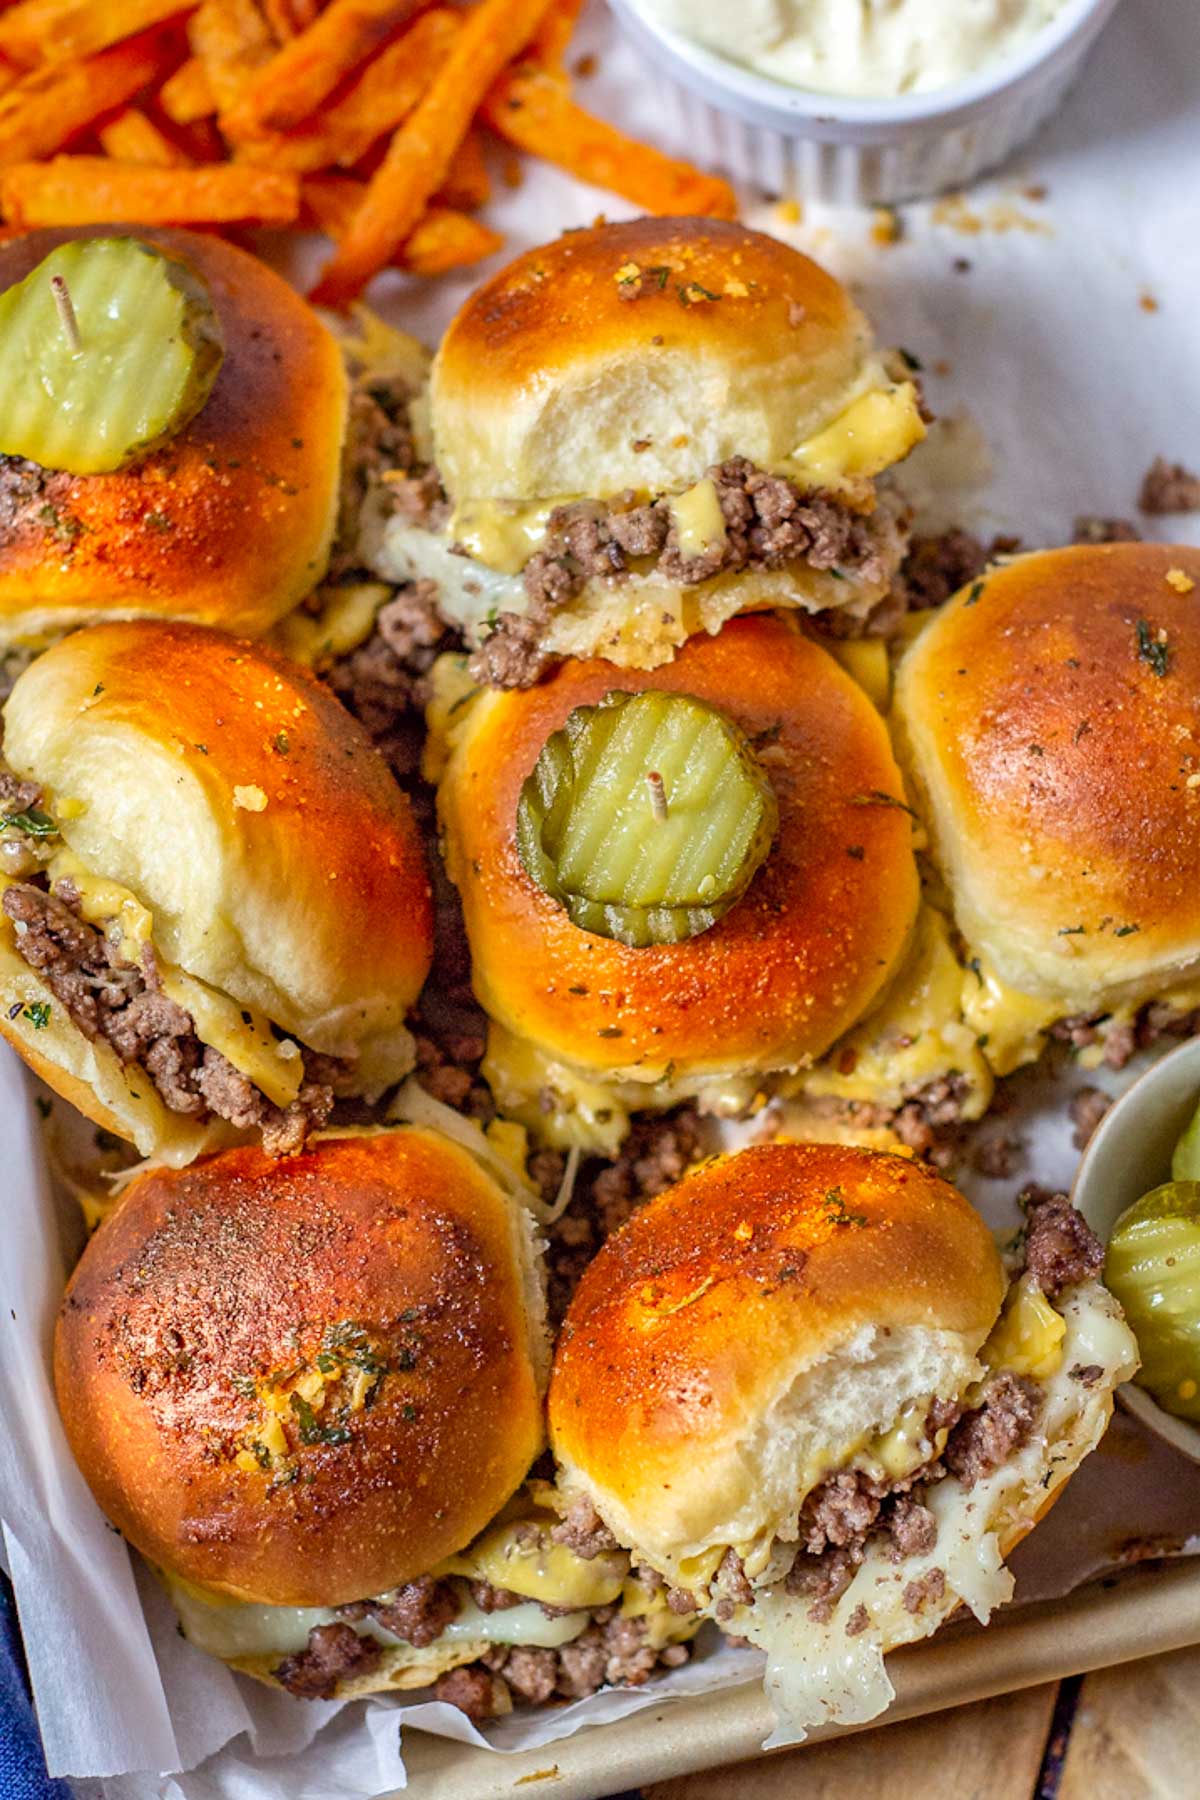 Baked Ground Beef Sliders are topped with a pickle.